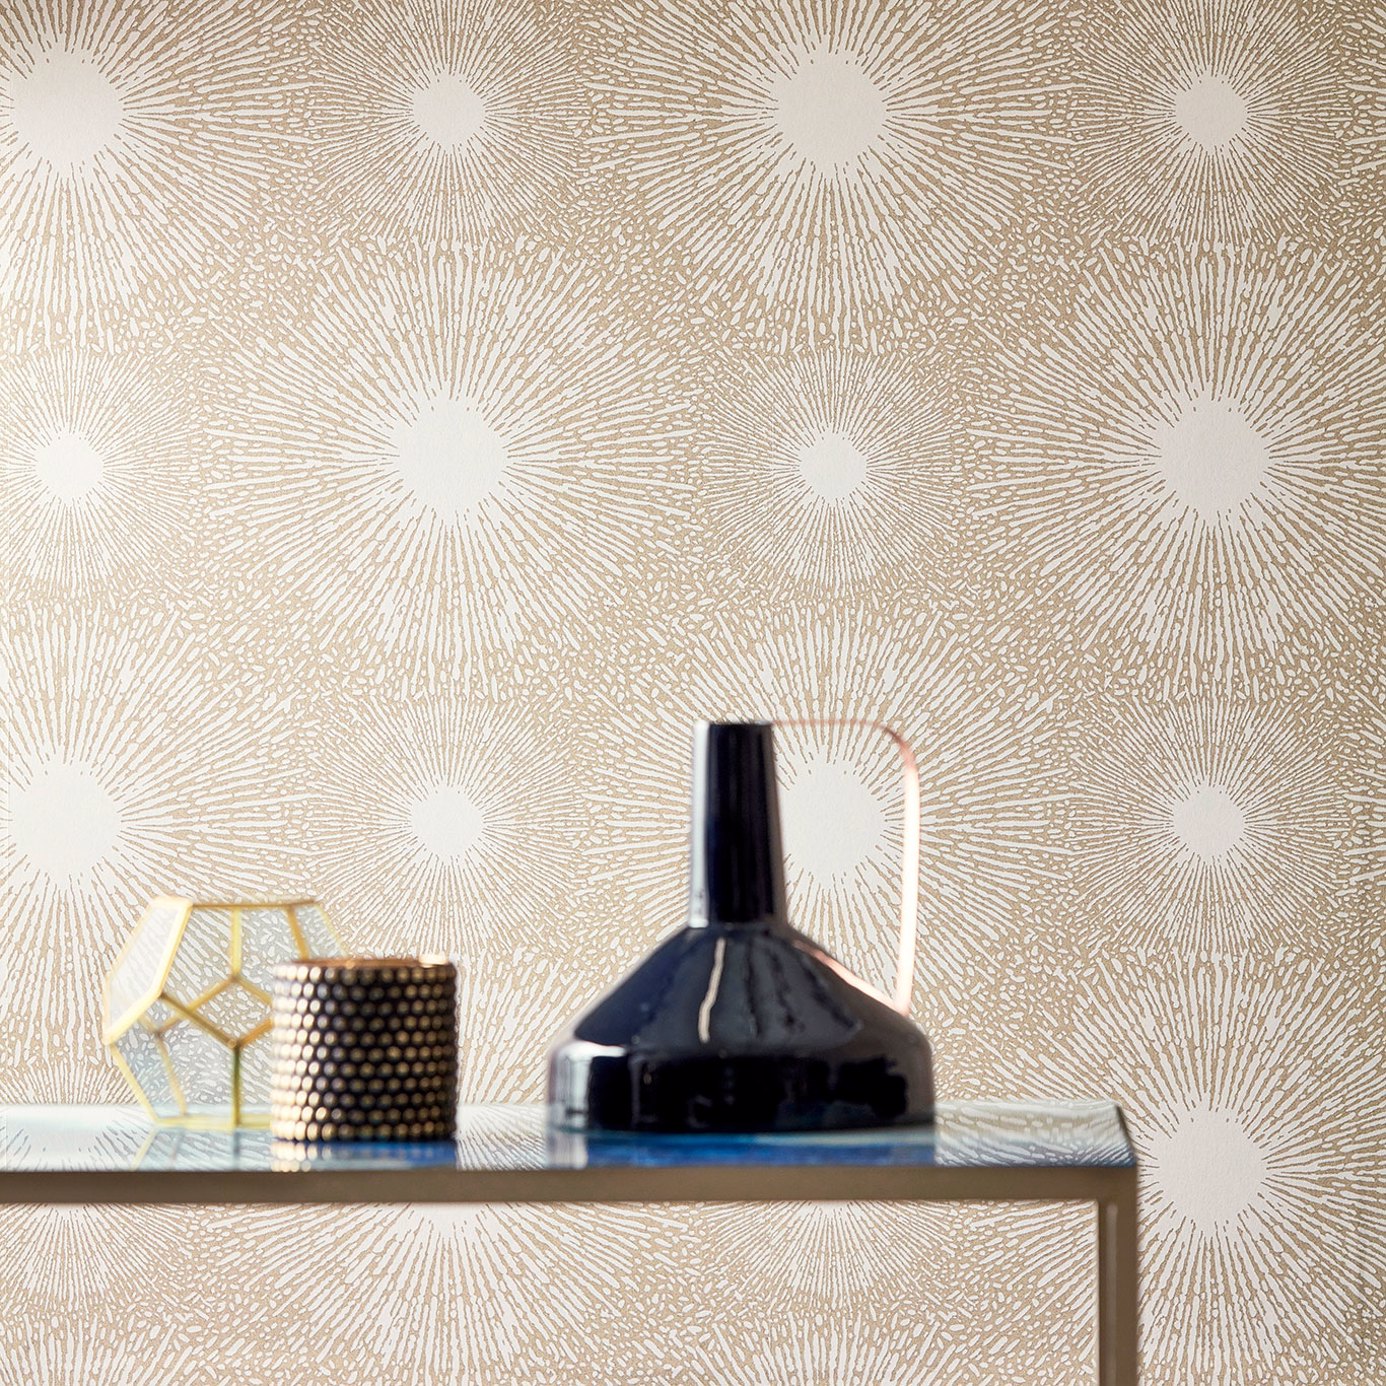 Anthology Perlite Crysocolla / Gold Ore Wallpaper by HAR